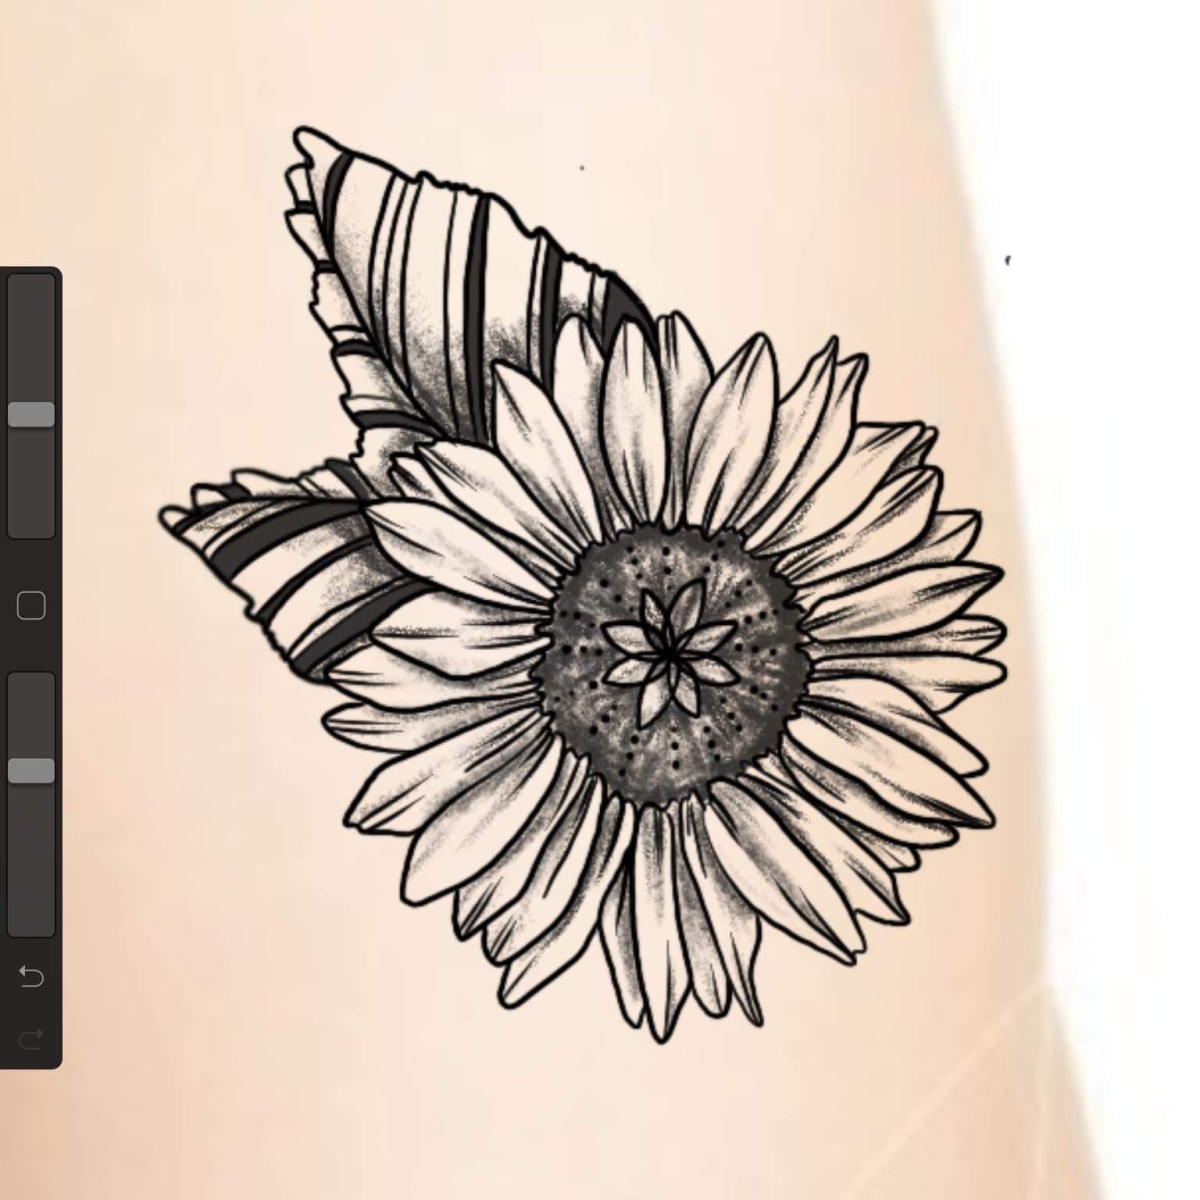 Will you dry your tattoo practice stencils  uchongdong666